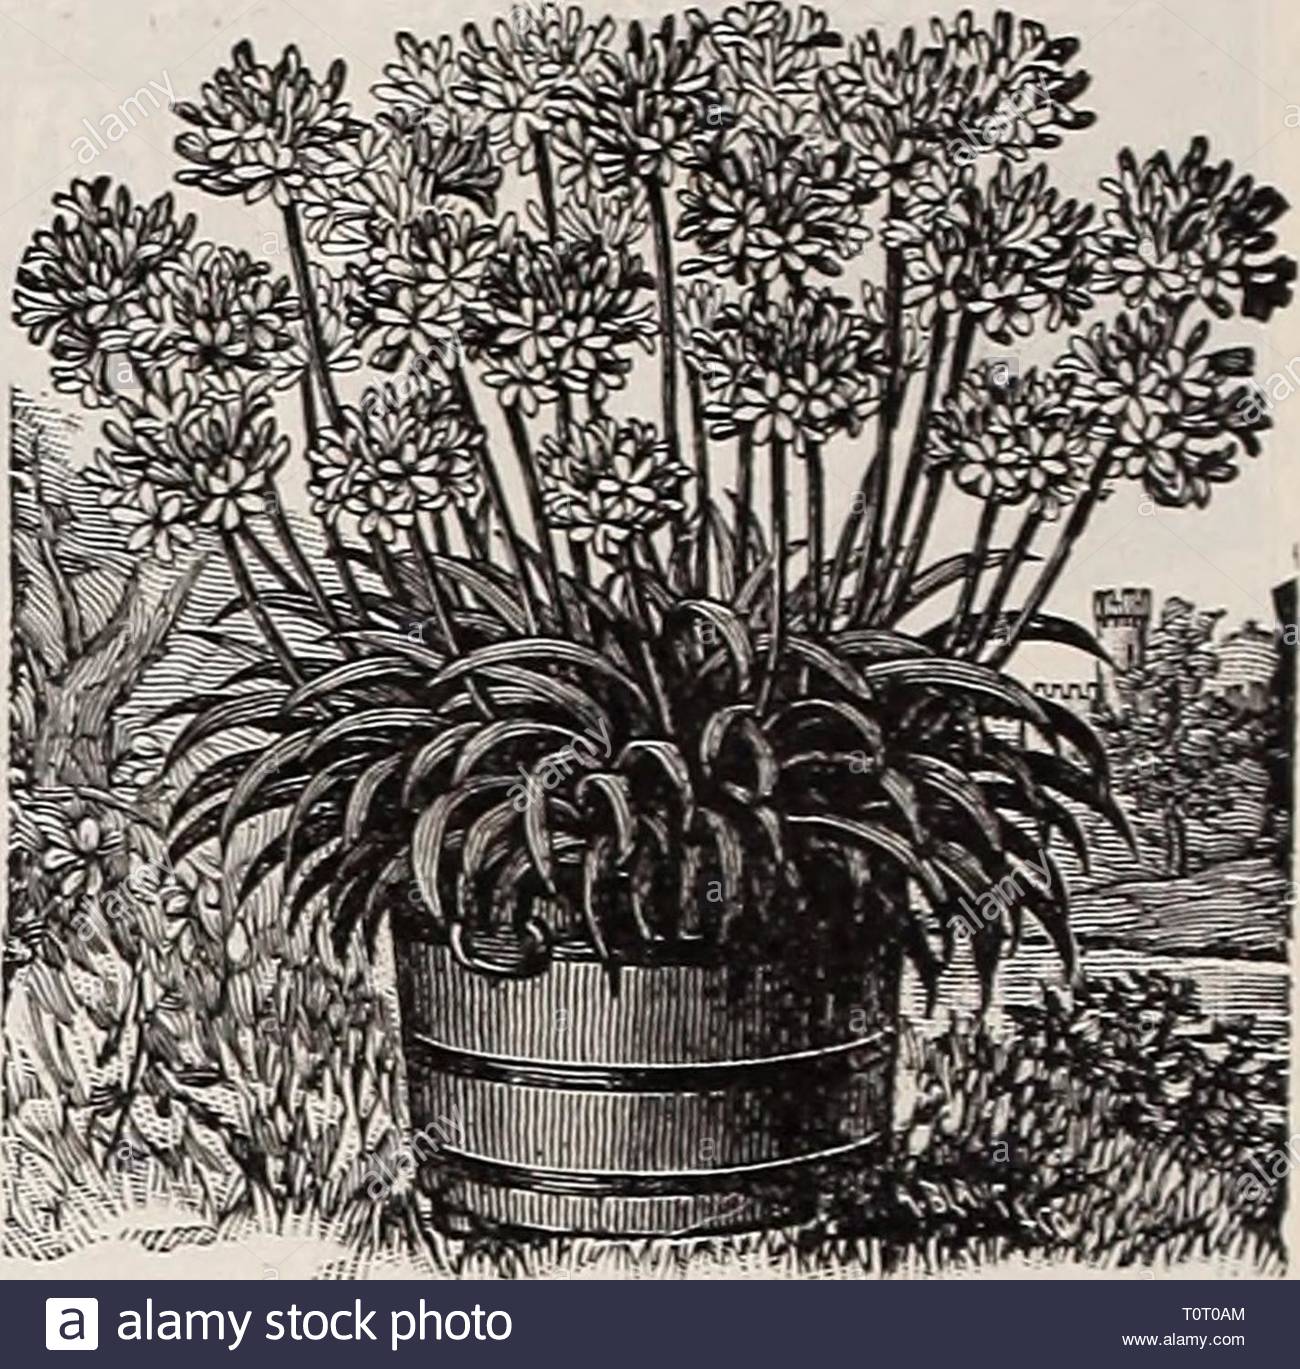 dreers 1909 garden book 1909 dreers 1909 garden book dreers1909garden1909henr year 1909 120 agapanthus umbellatlls blue lilv of the atile a splendid ornamental plant bearing clusters of bright blue flowers on long flowerstalks and lasting a long time in bloom a most desirable plant for outdoor decoration planted in large pots or tubs on the lawn or piazza albus a white flowering variety 15 cts each 150 per doz one of each 25 cts ageratum floss flower one of the best of bedding plants always in bloom blanche dwarf pact white i princess pauline blue white c T0T0AM